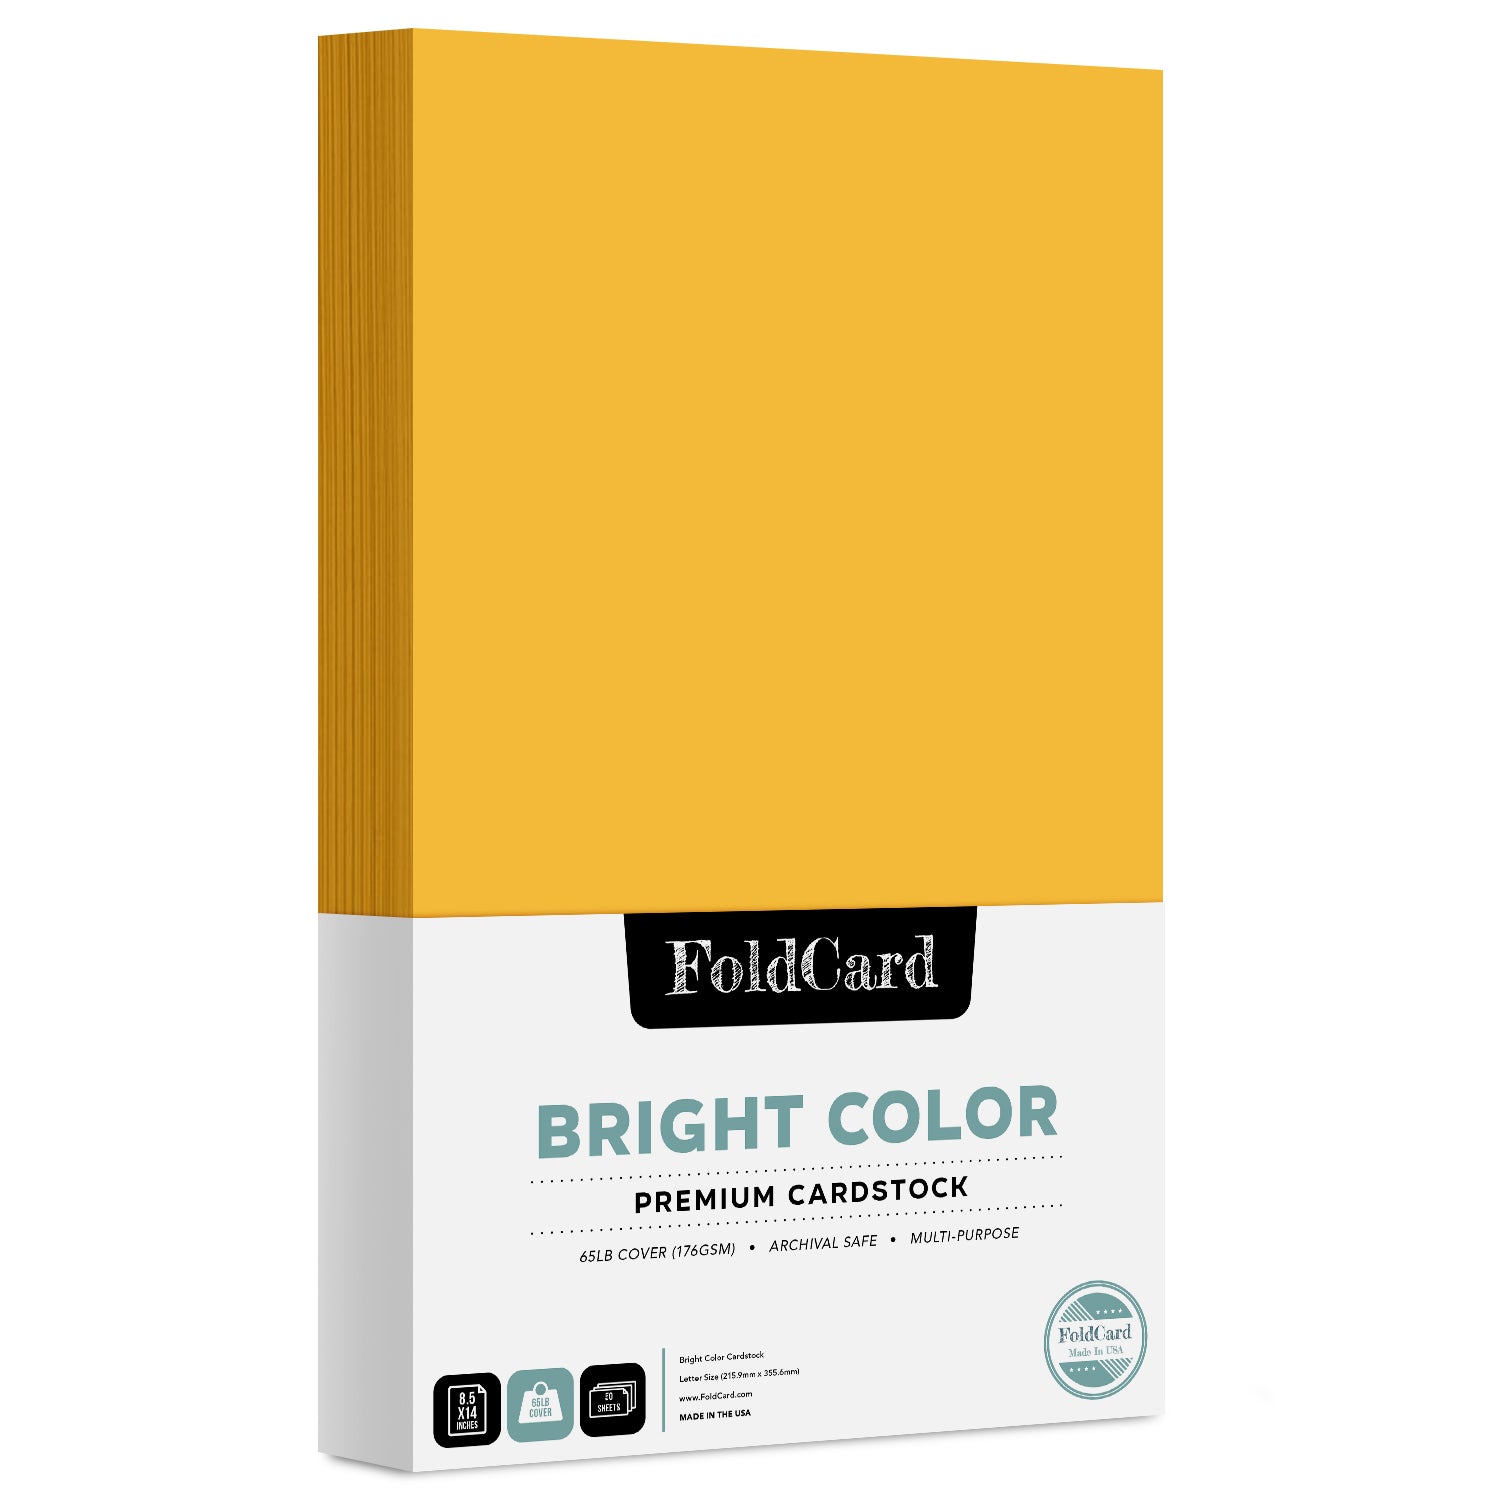 Vibrant Bright Color Cardstock for DIY Art Projects - 8.5x14 50 Sheets